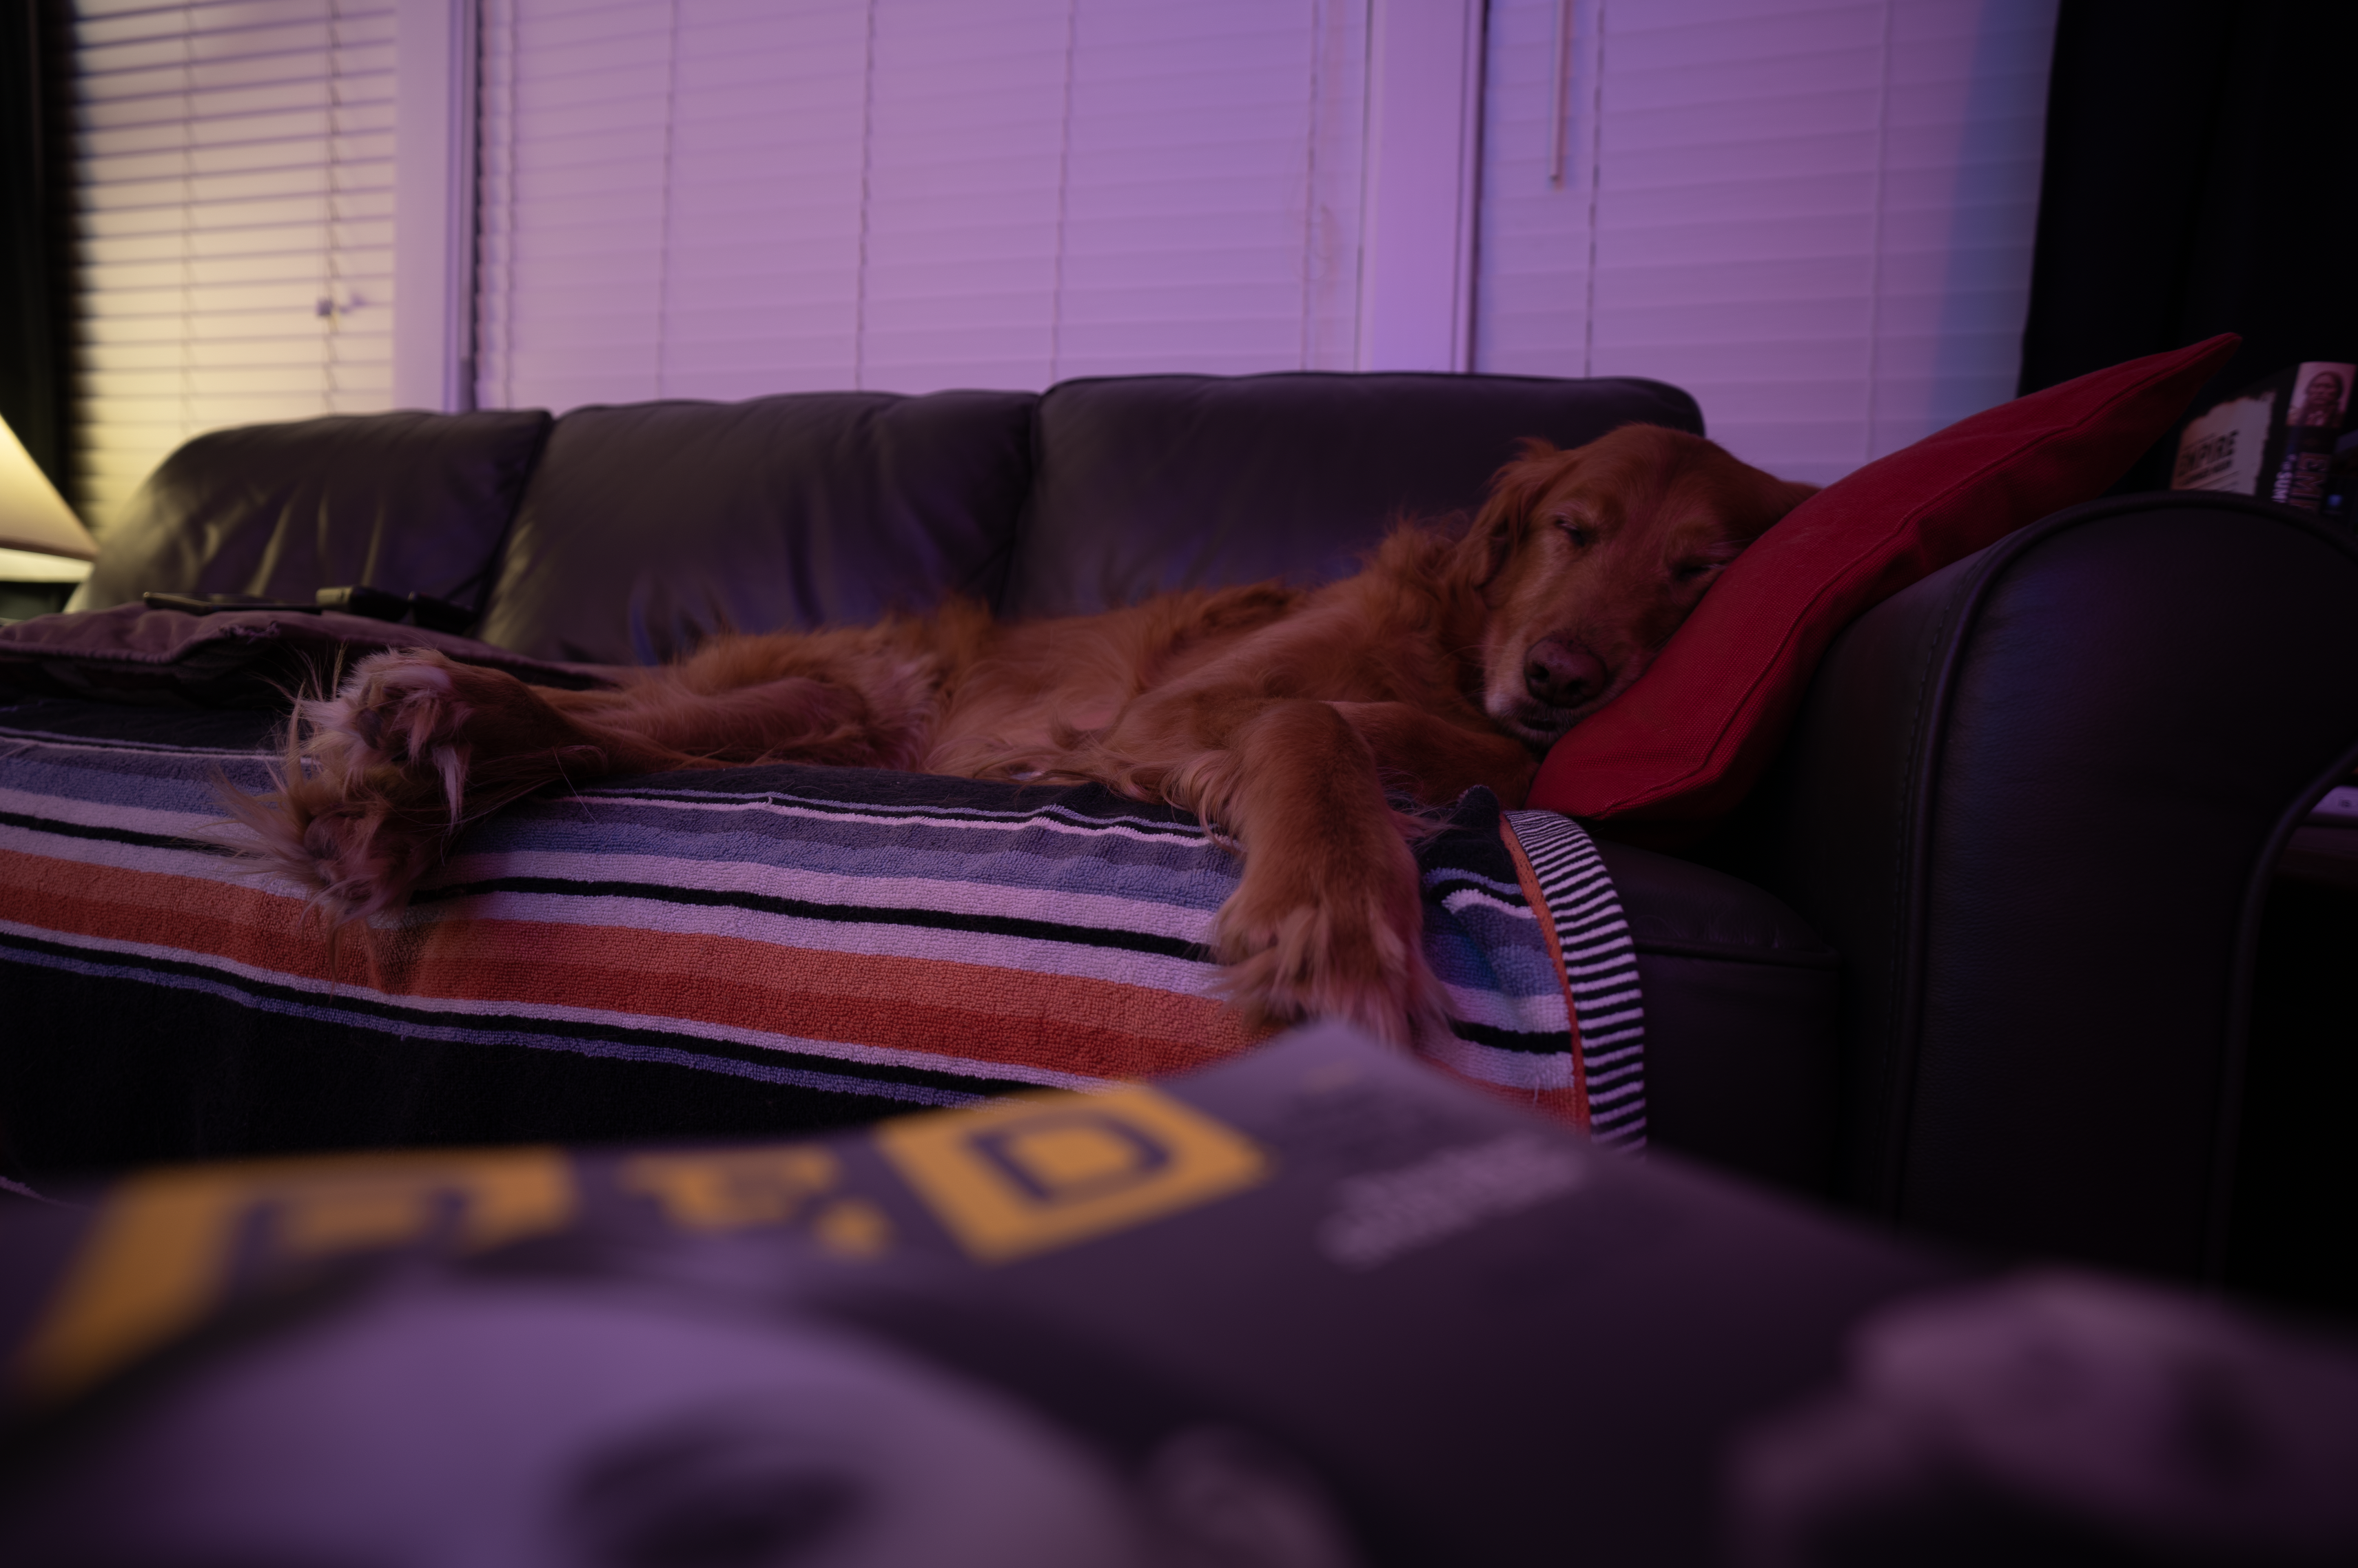 Golden retriever named 'Bear' lounging on a couch